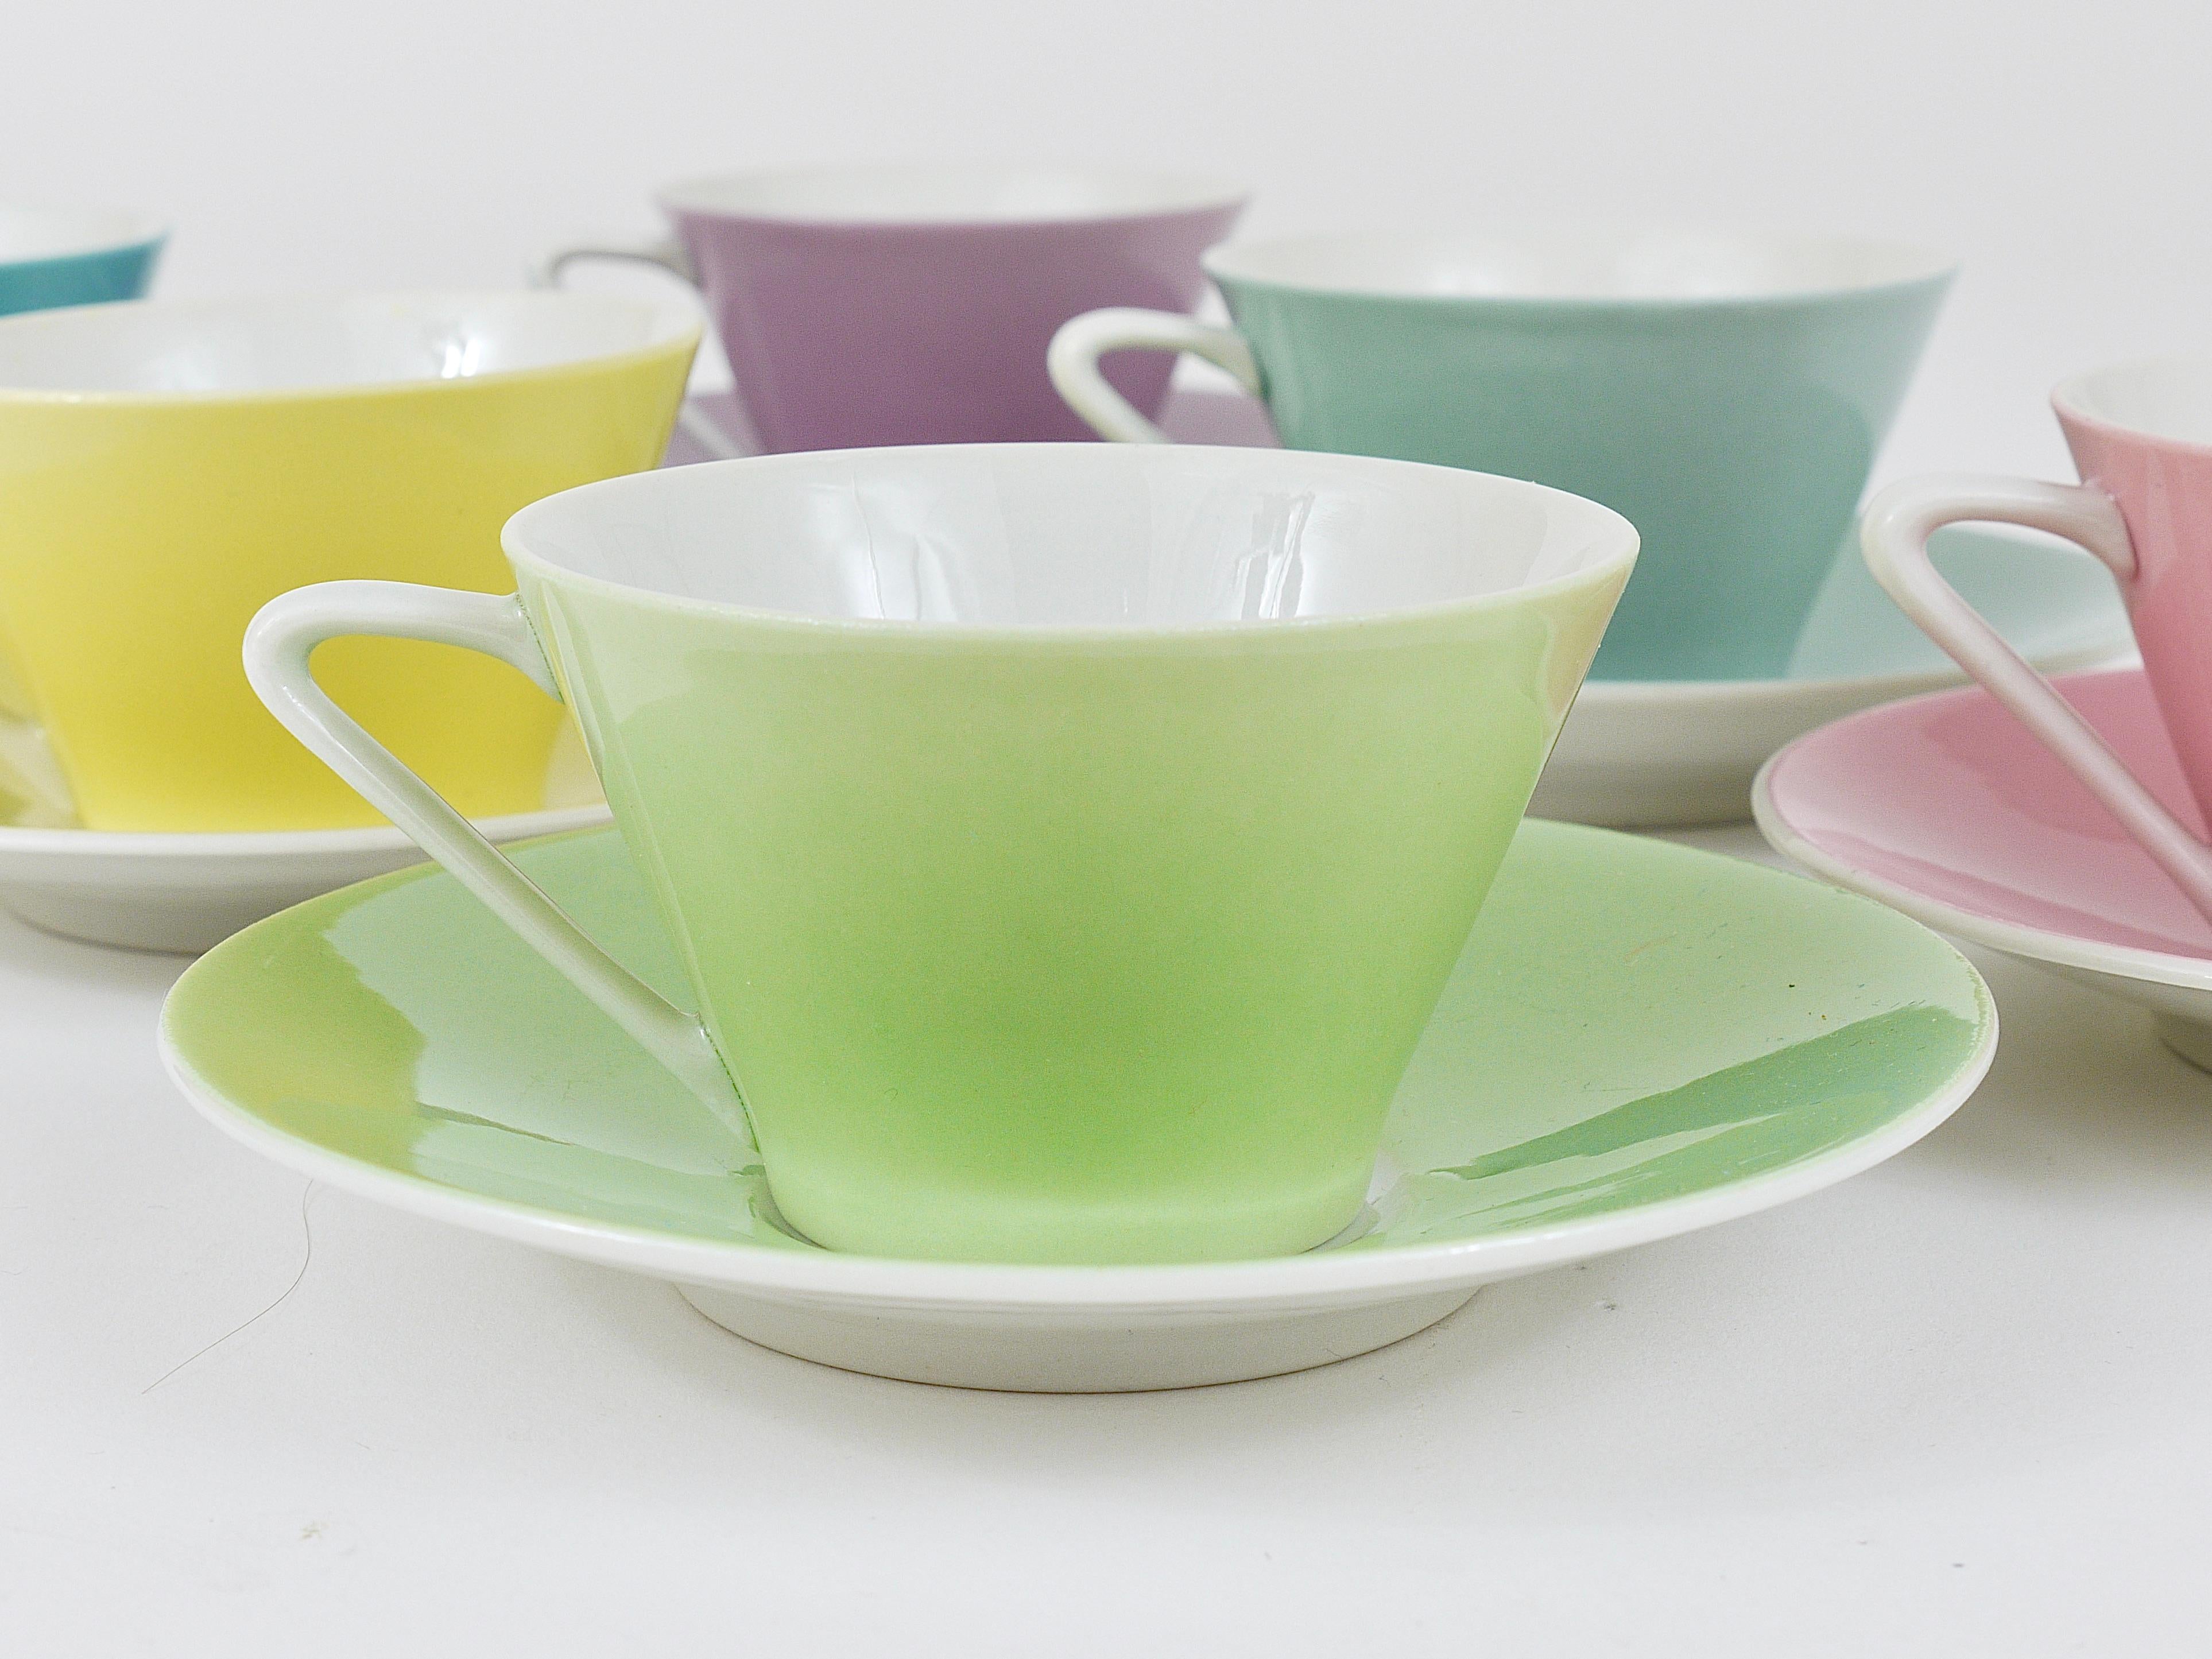 6 Midcentury Pastel Daisy Porcelain Espresso Coffee Cups, Lilien, Austria, 1950s In Good Condition For Sale In Vienna, AT